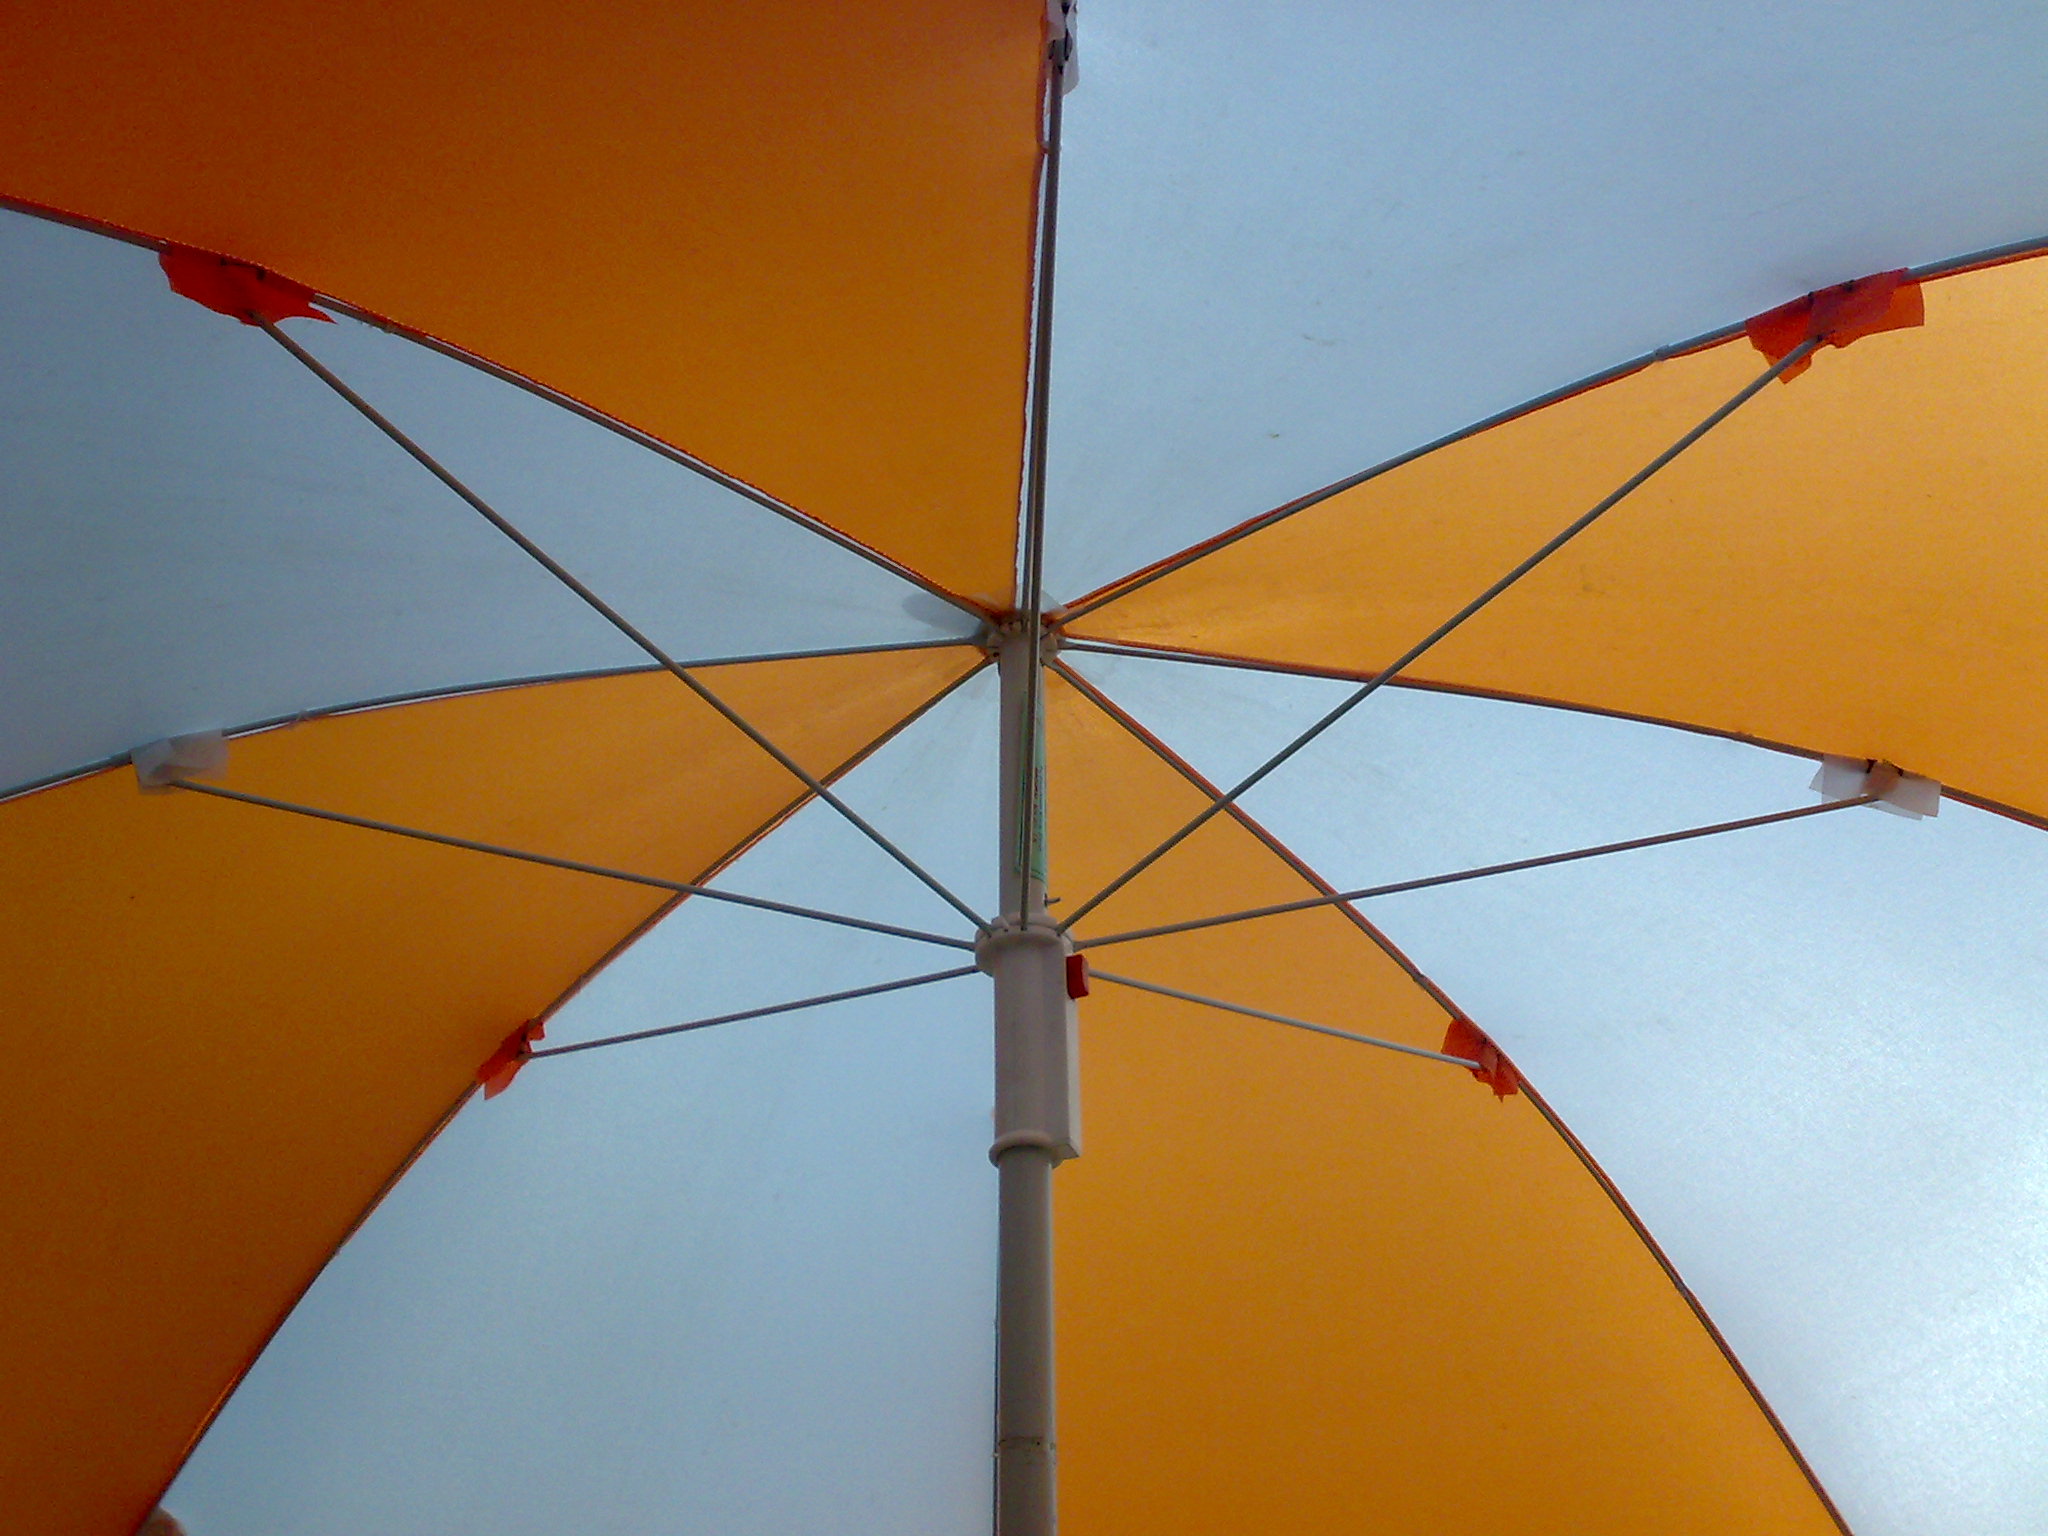 an orange and blue umbrella has the handle extended